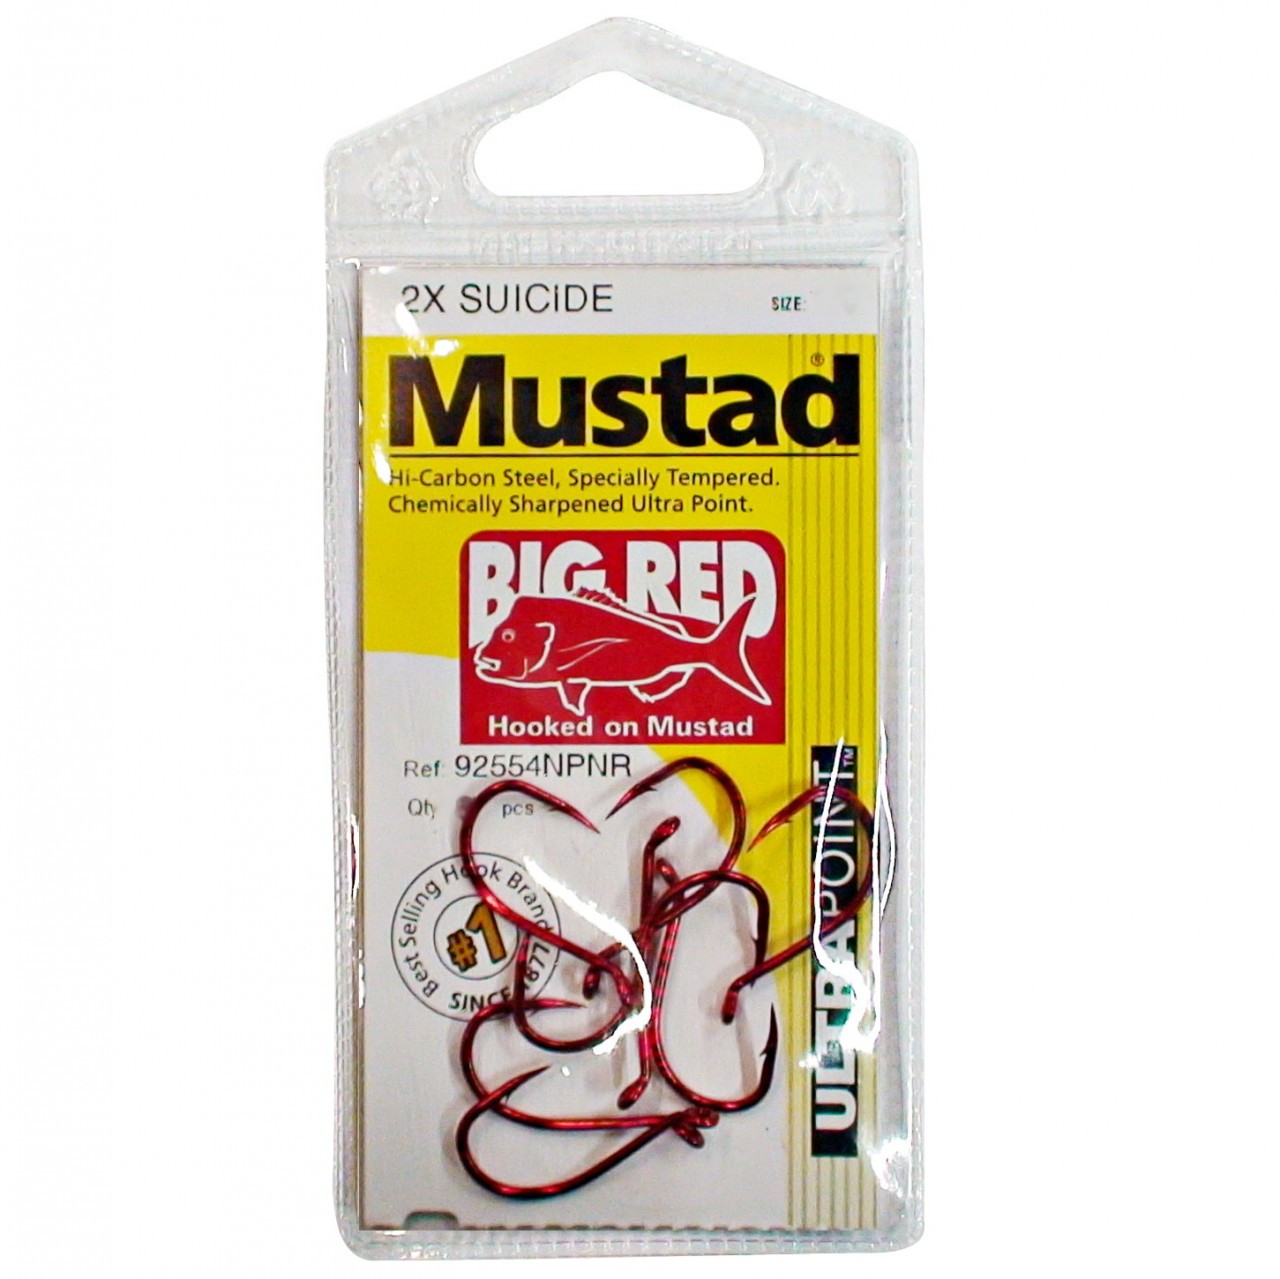 Mustad Big Red Suicide Fishing Hooks Single Packet